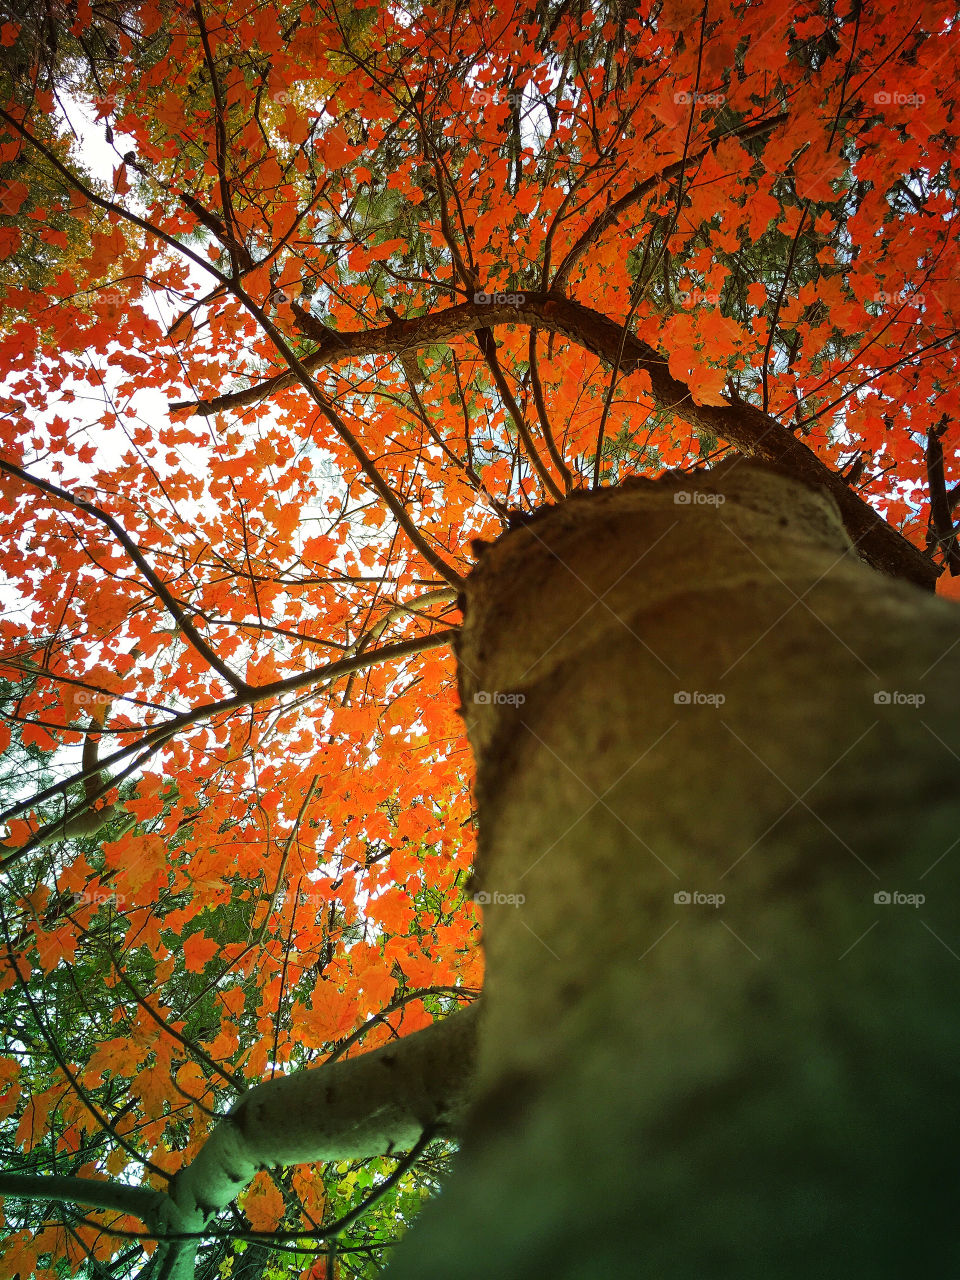 Looking up to the sky at the fall foliage. 